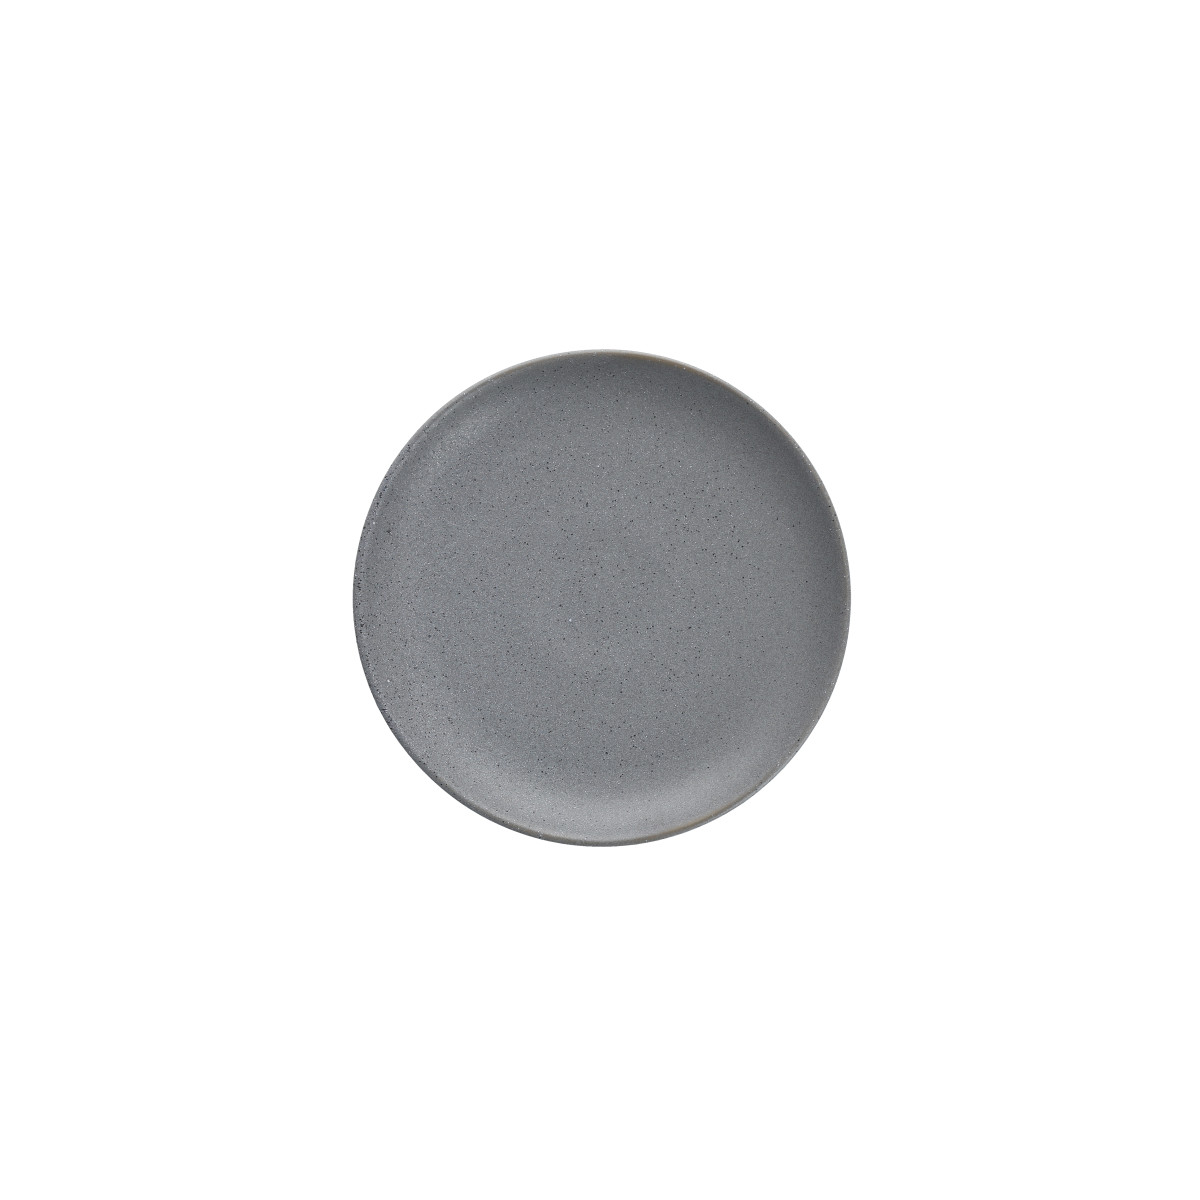 Sound Salad Plate, Cement, Set of 4